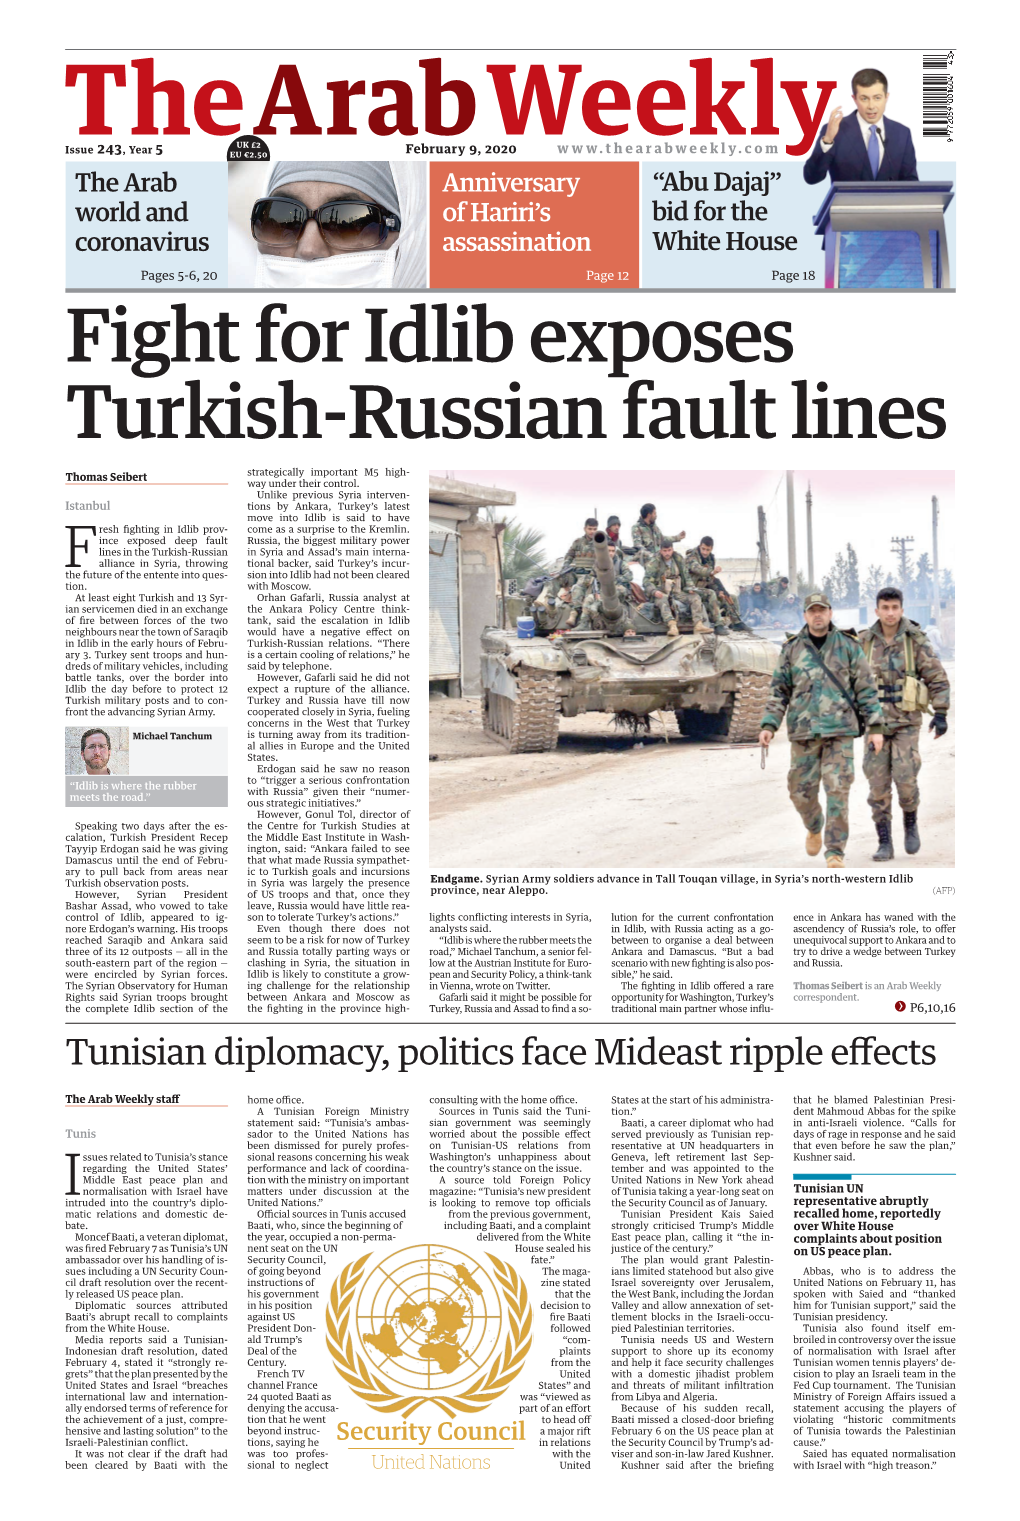 Fight for Idlib Exposes Turkish-Russian Fault Lines